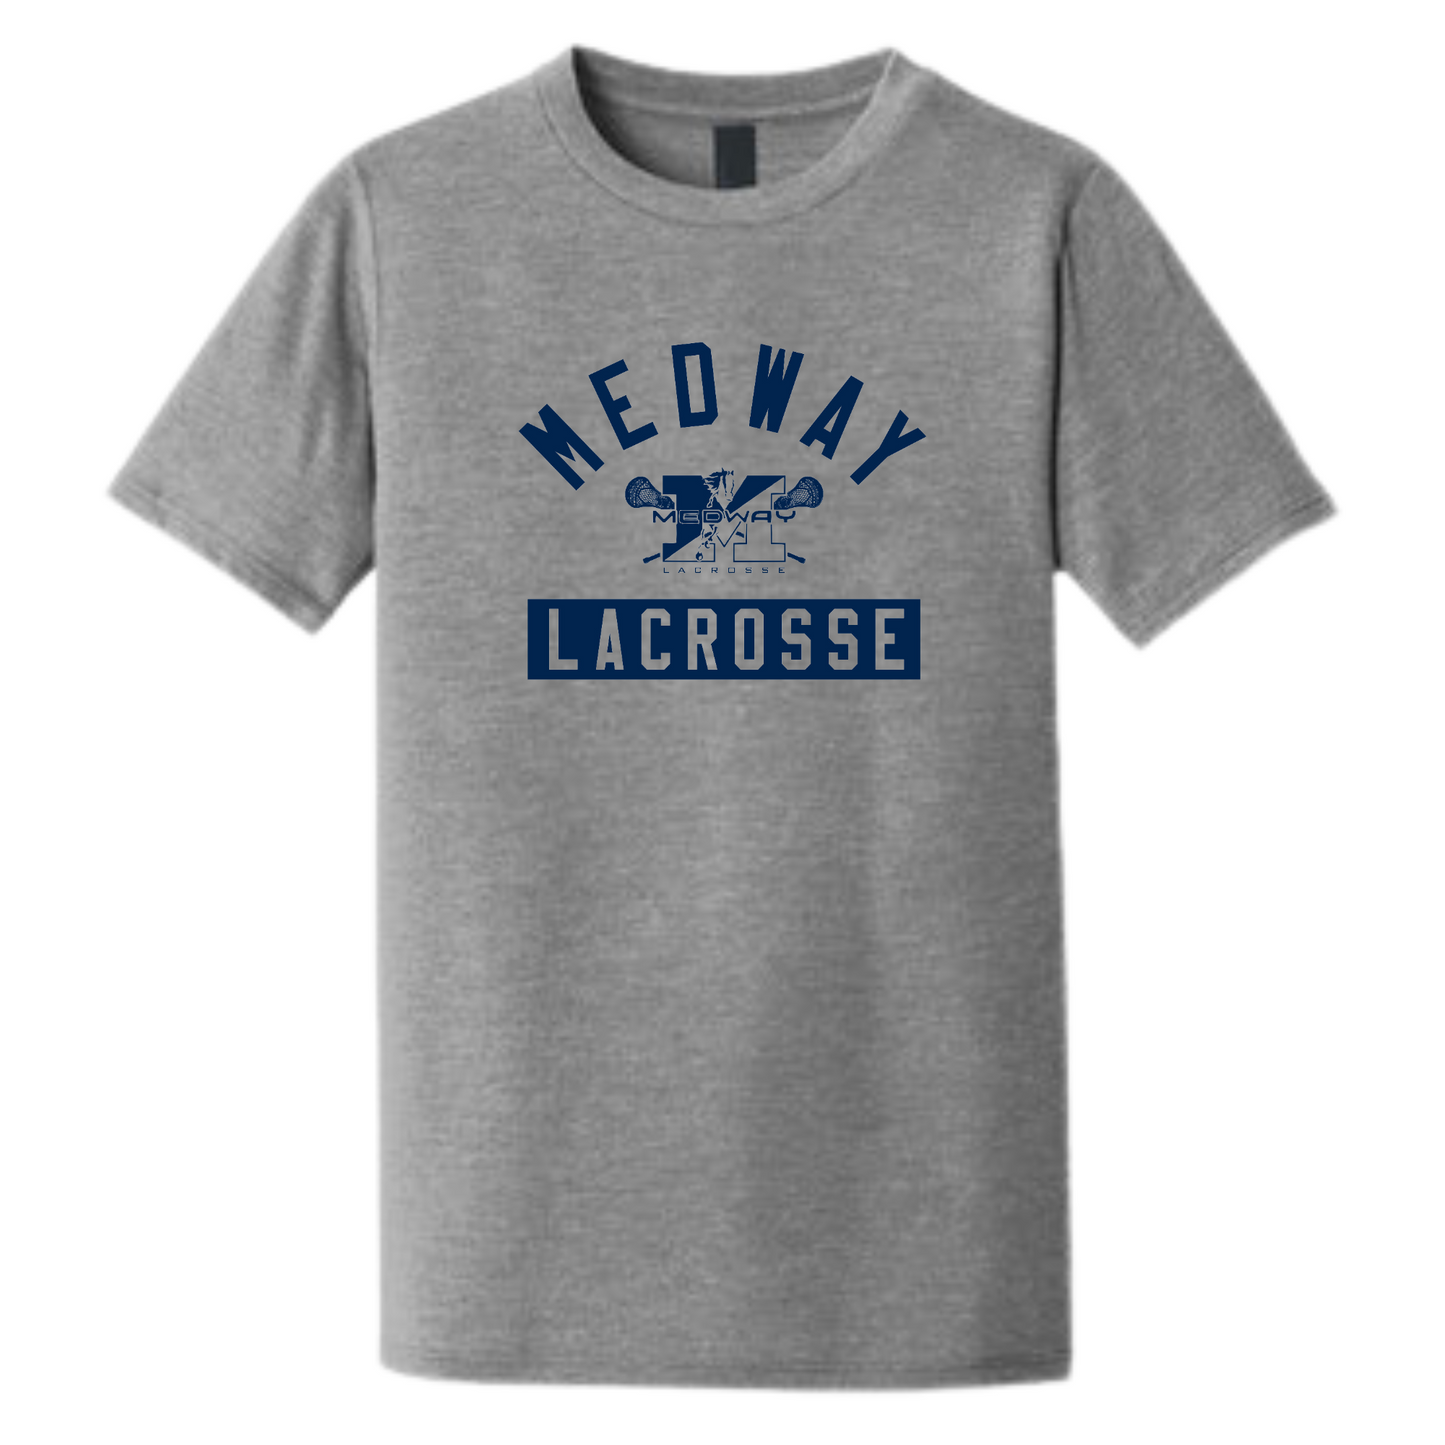 MEDWAY YOUTH LACROSSE ARCH YOUTH TEE - GRAY